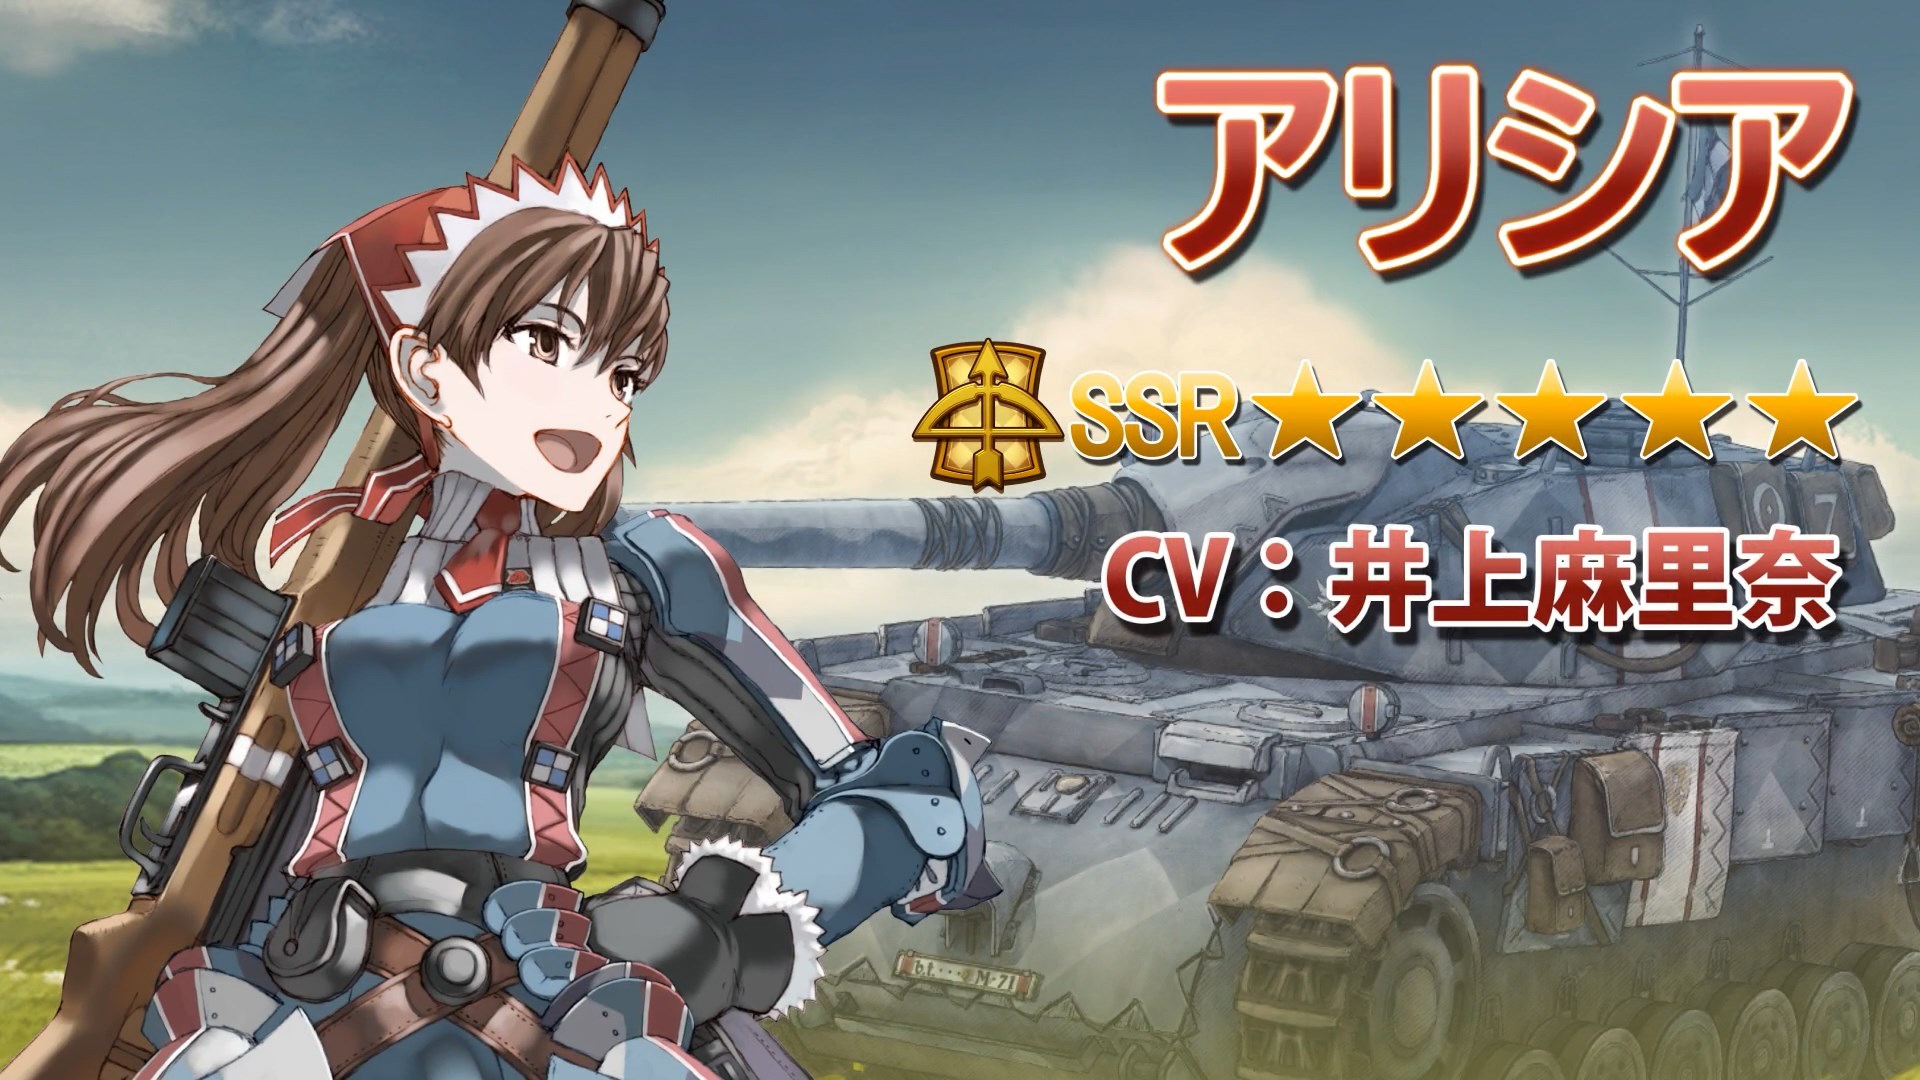 Valkyria Chronicles X Chain Chronicle Crossover Trailers - Valkyria Chronicles Edelweiss , HD Wallpaper & Backgrounds